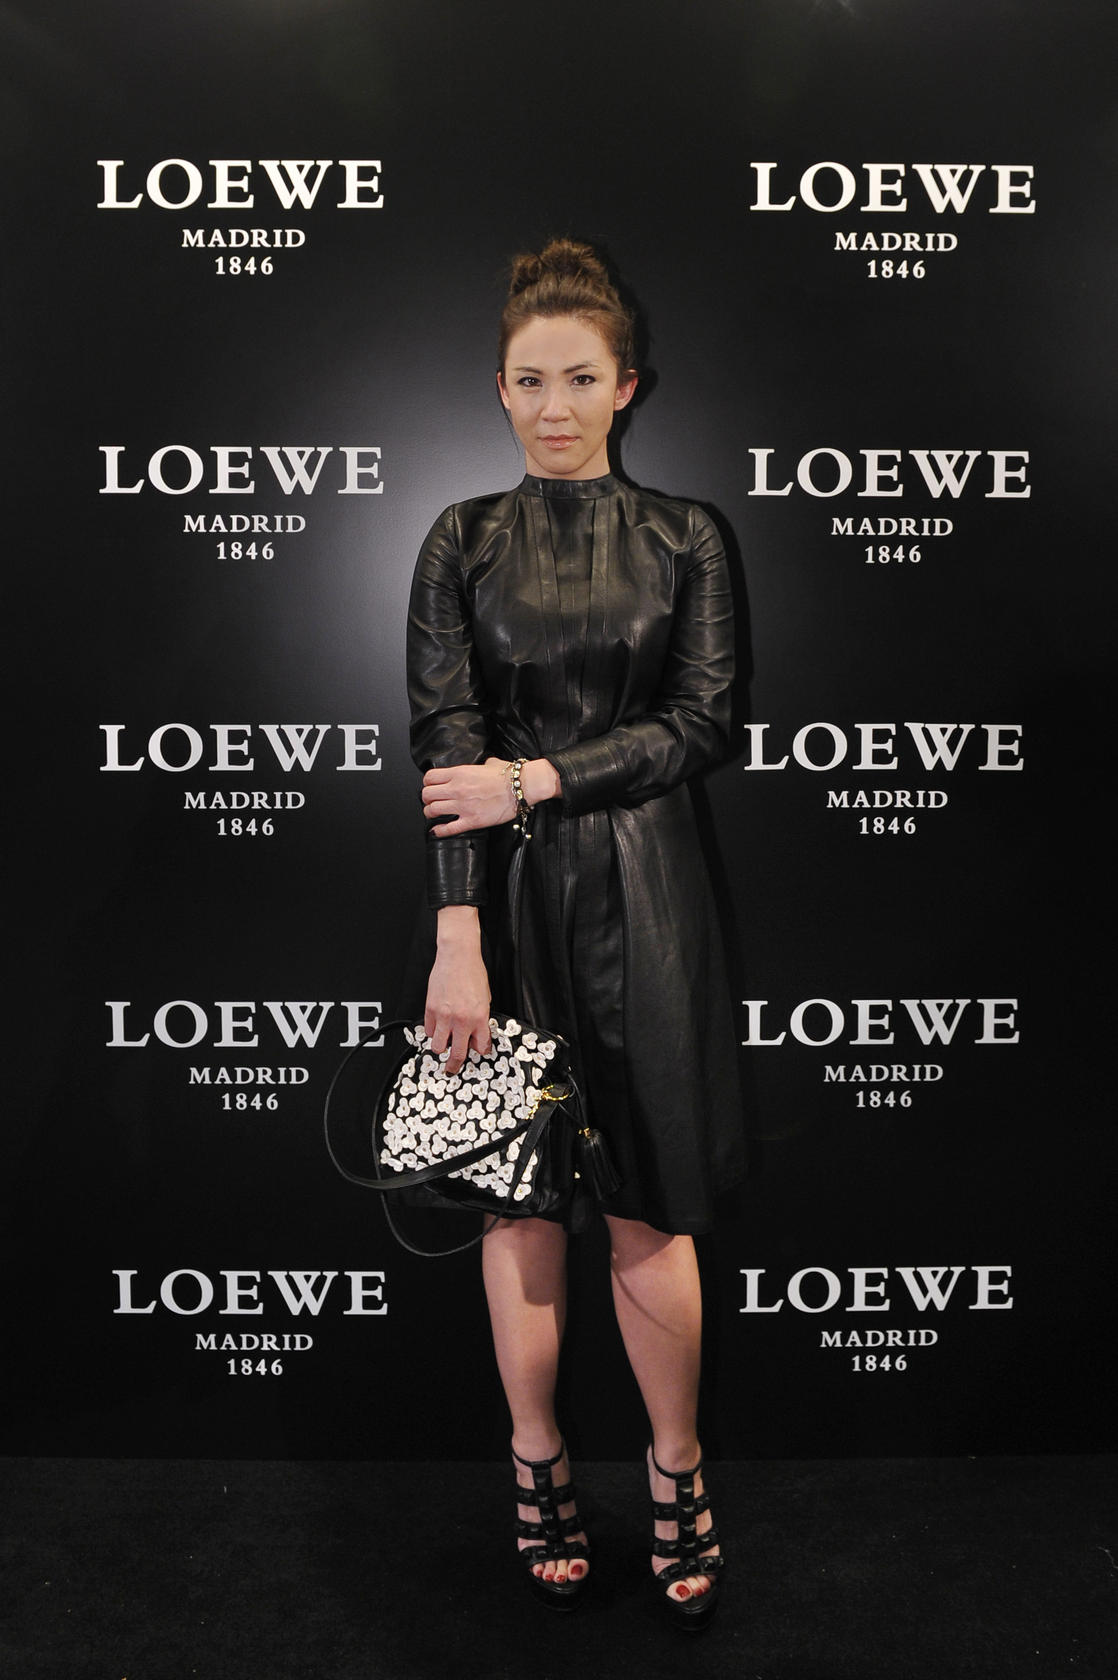 168 years of Loewe touring exposition - LVMH